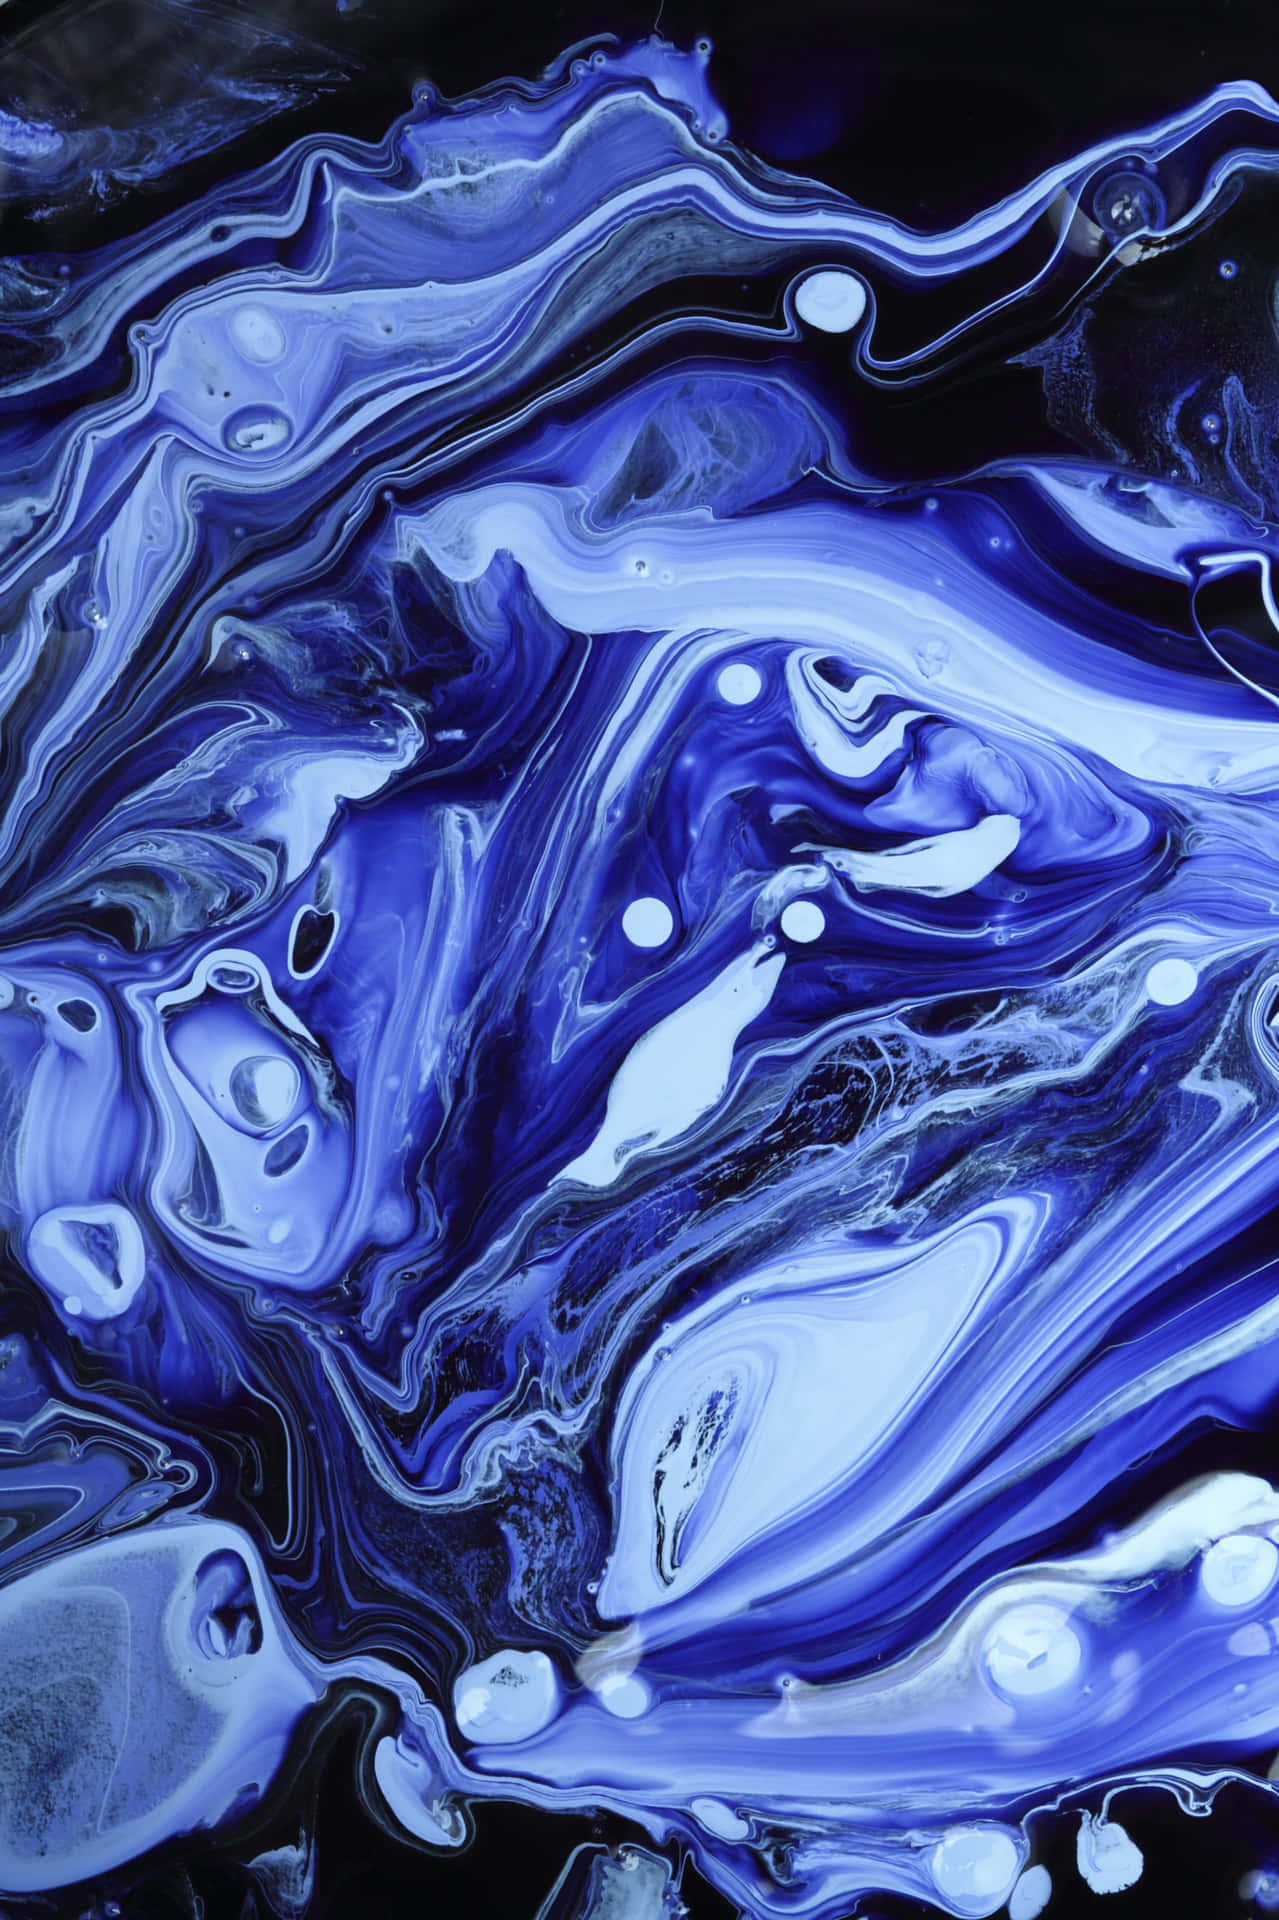 A Blue Liquid With Swirls Of Black And White